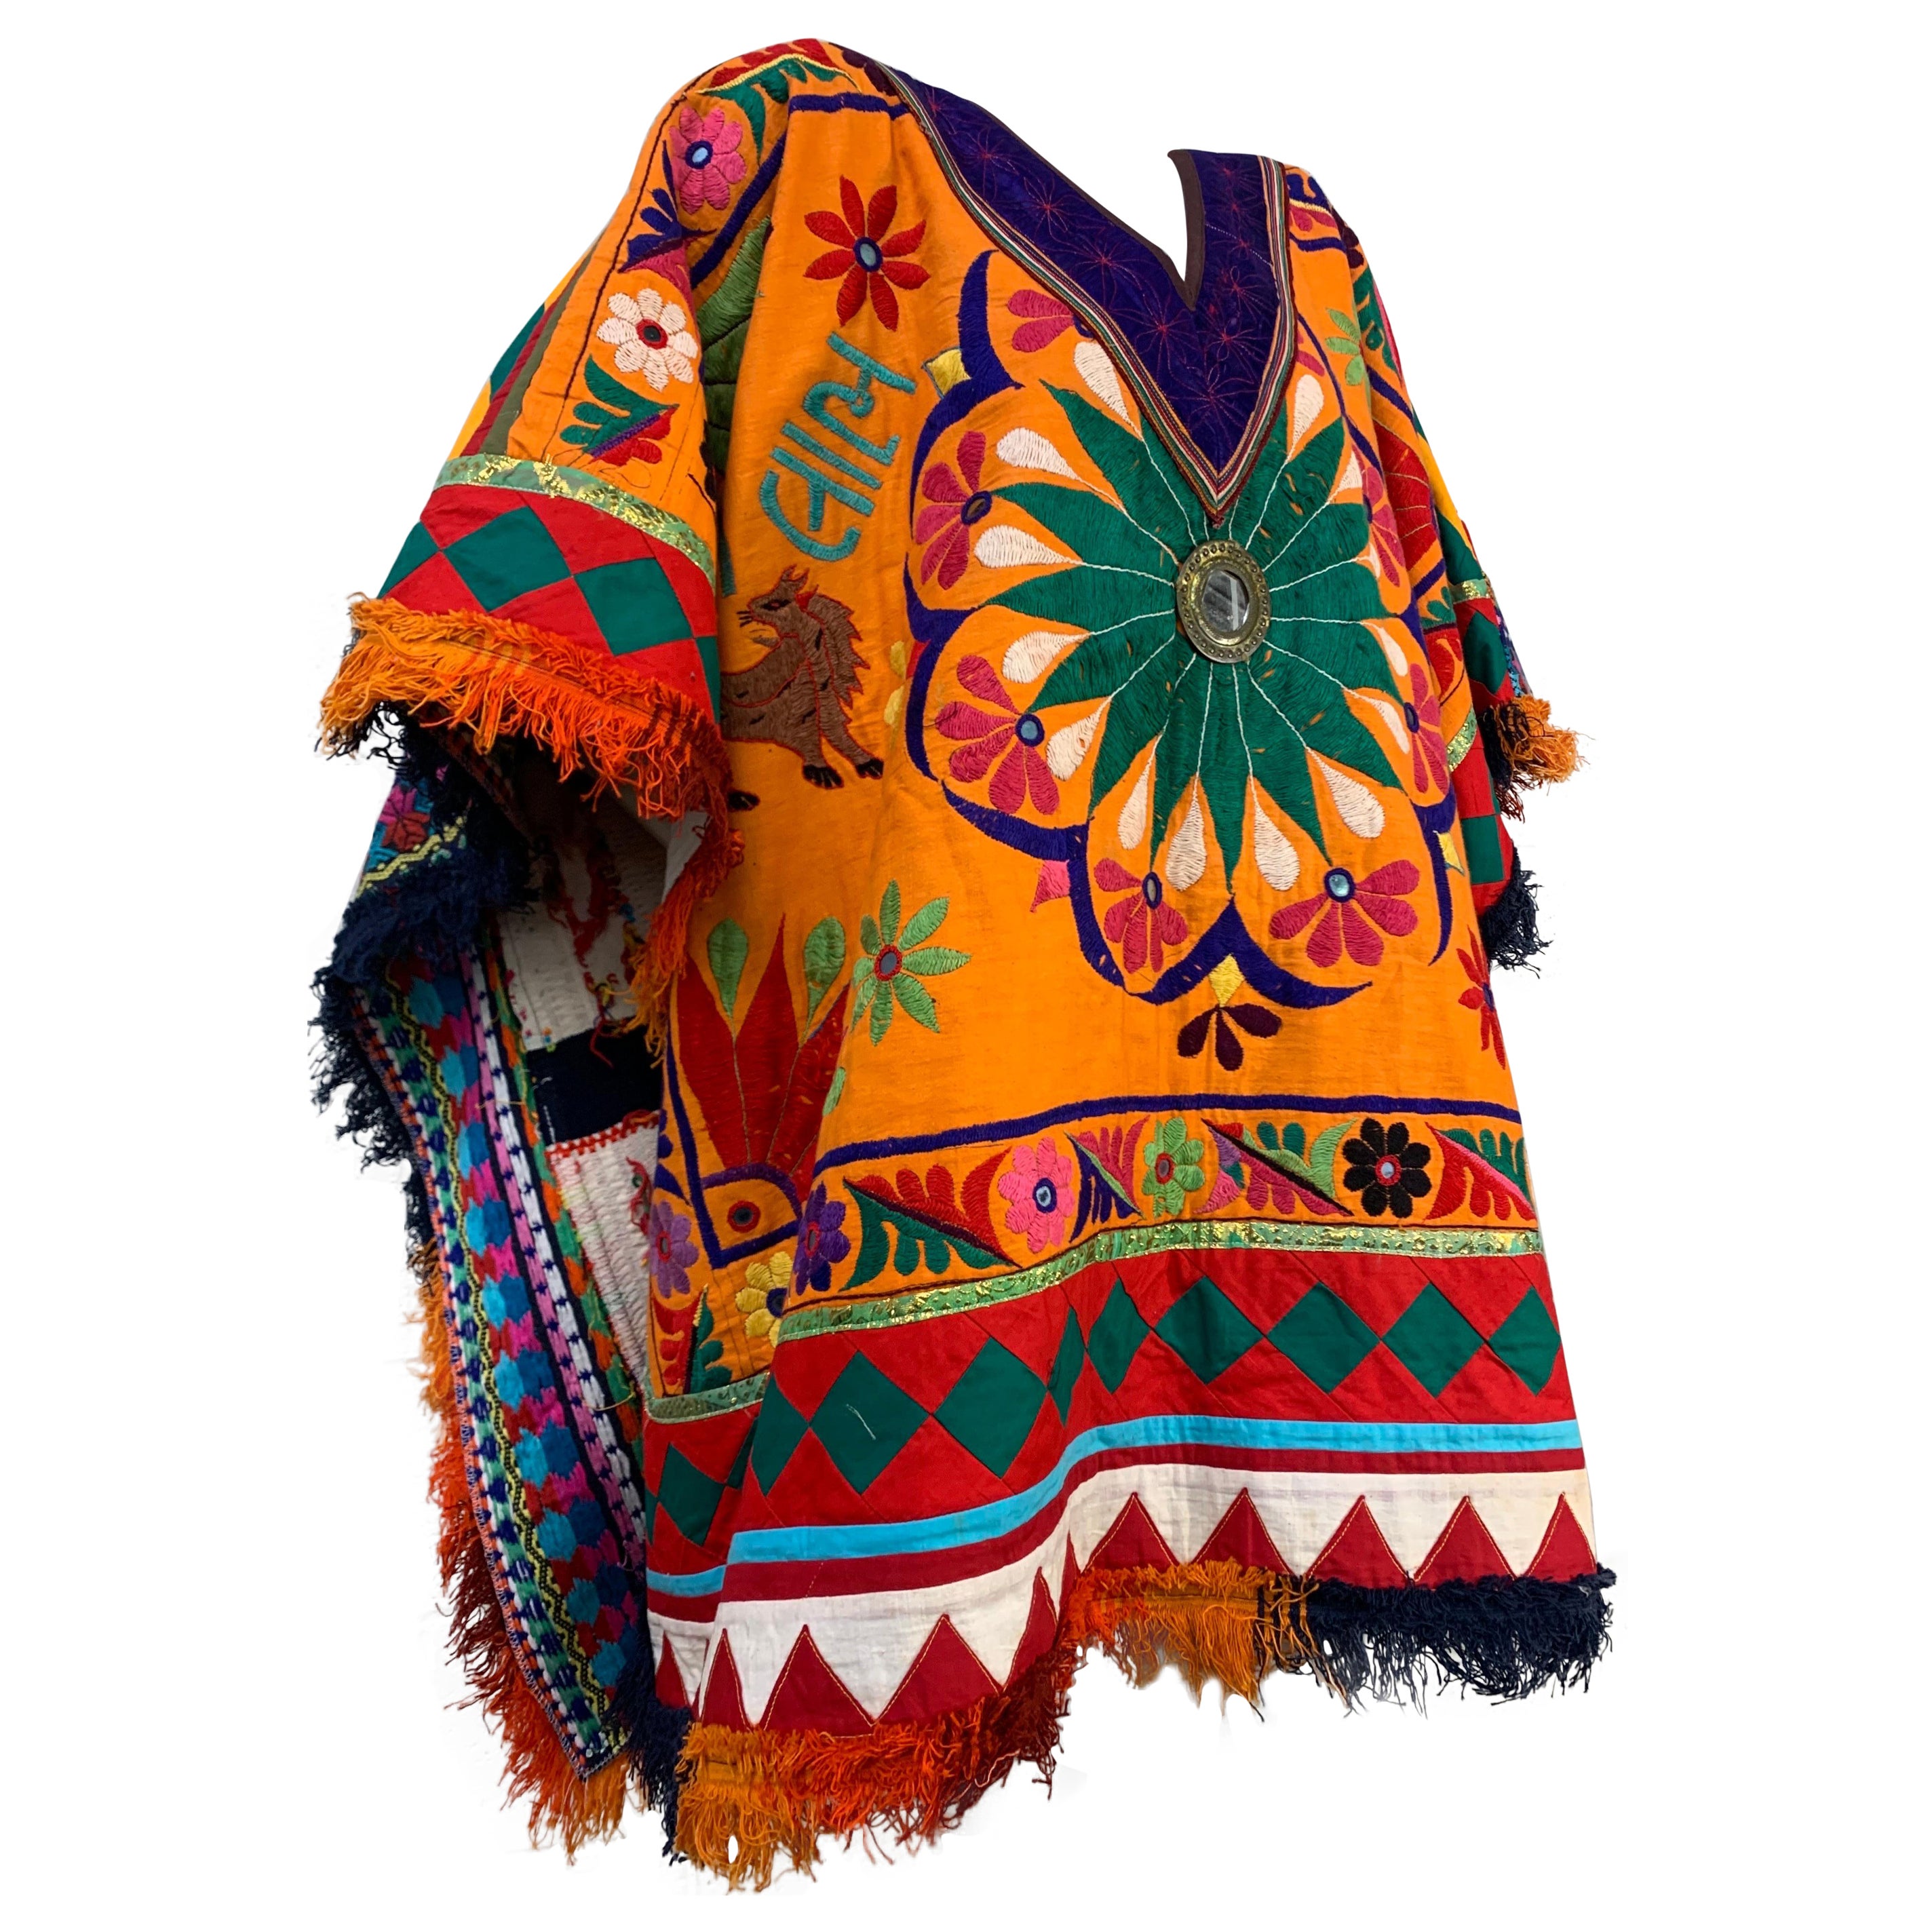 Torso Creations Art-To-Wear Woven & Embroidered Sarape  Poncho in Vivid Colors For Sale